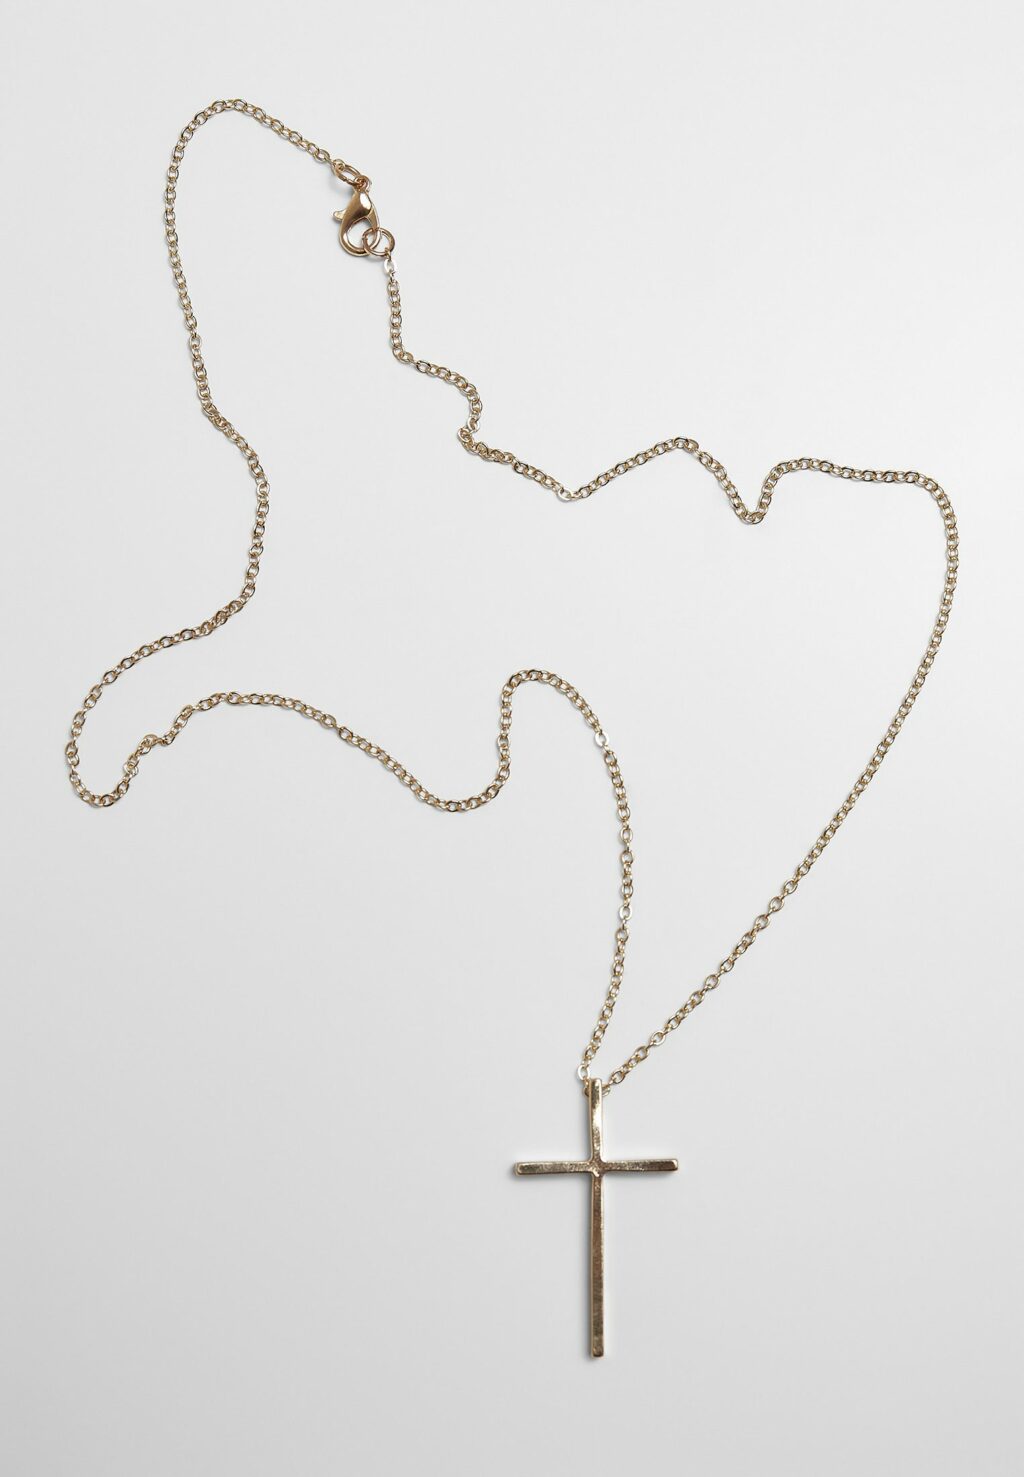 Big Basic Cross Necklace gold one TB4057